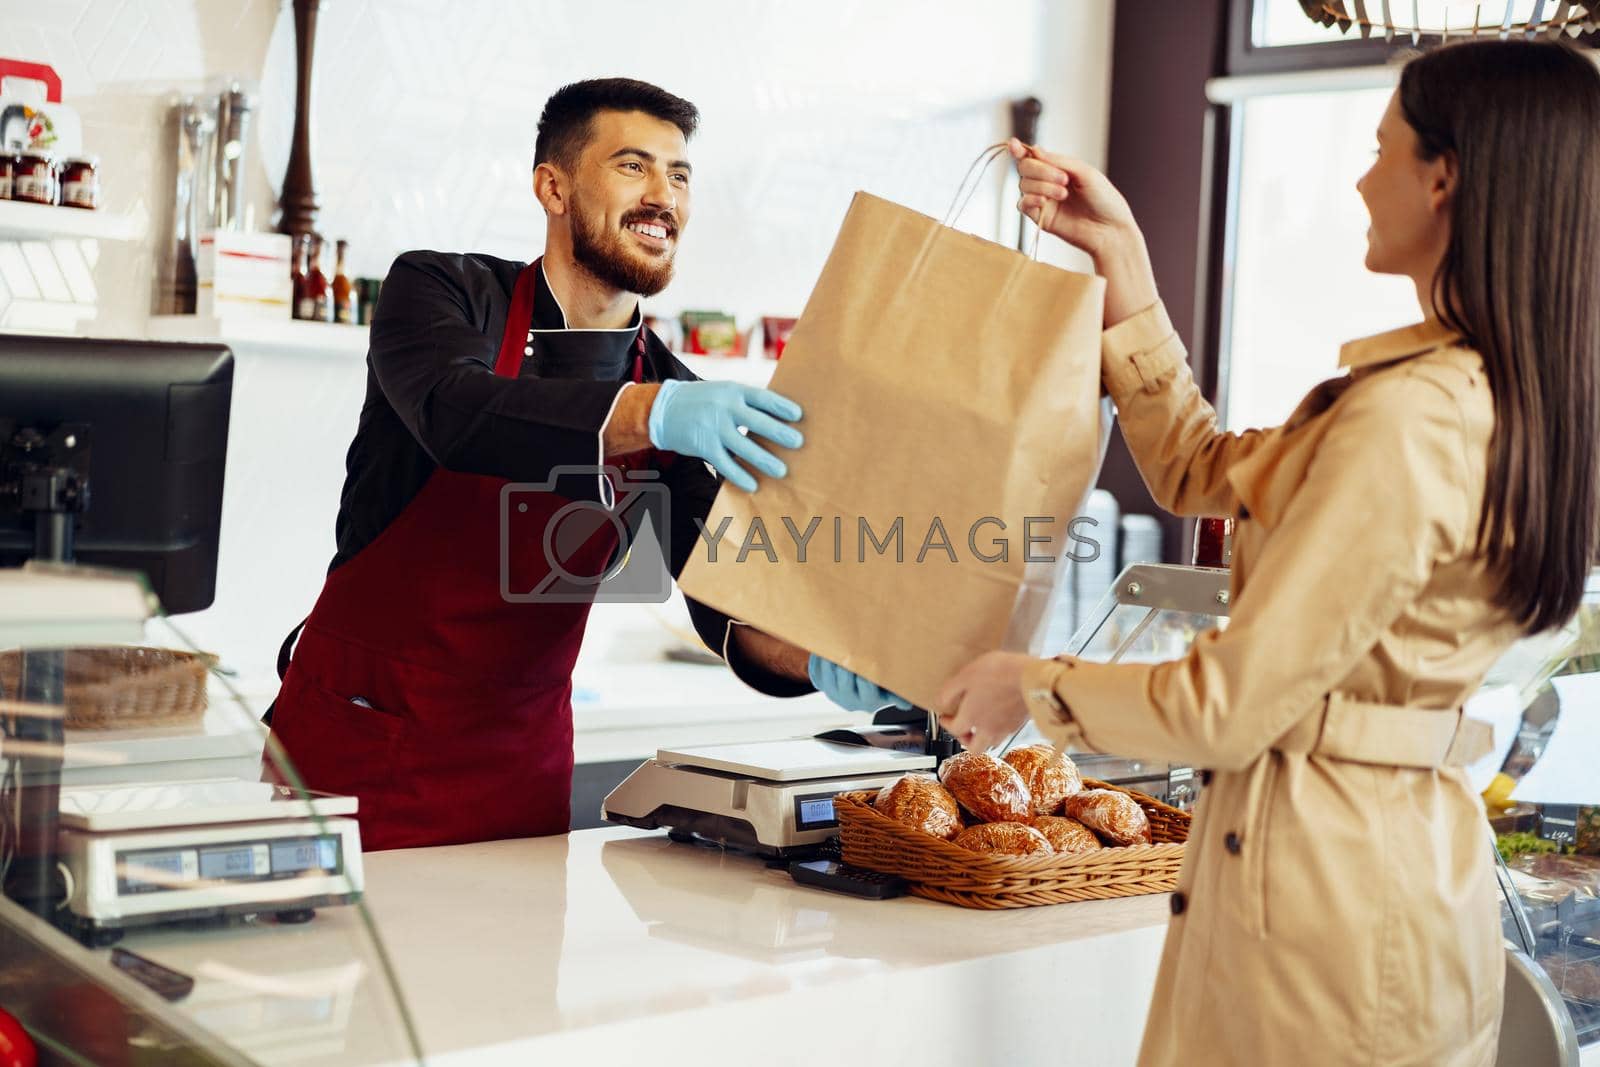 Royalty free image of Shop assistant handling shopping bag to female customer in grocery store by Fabrikasimf